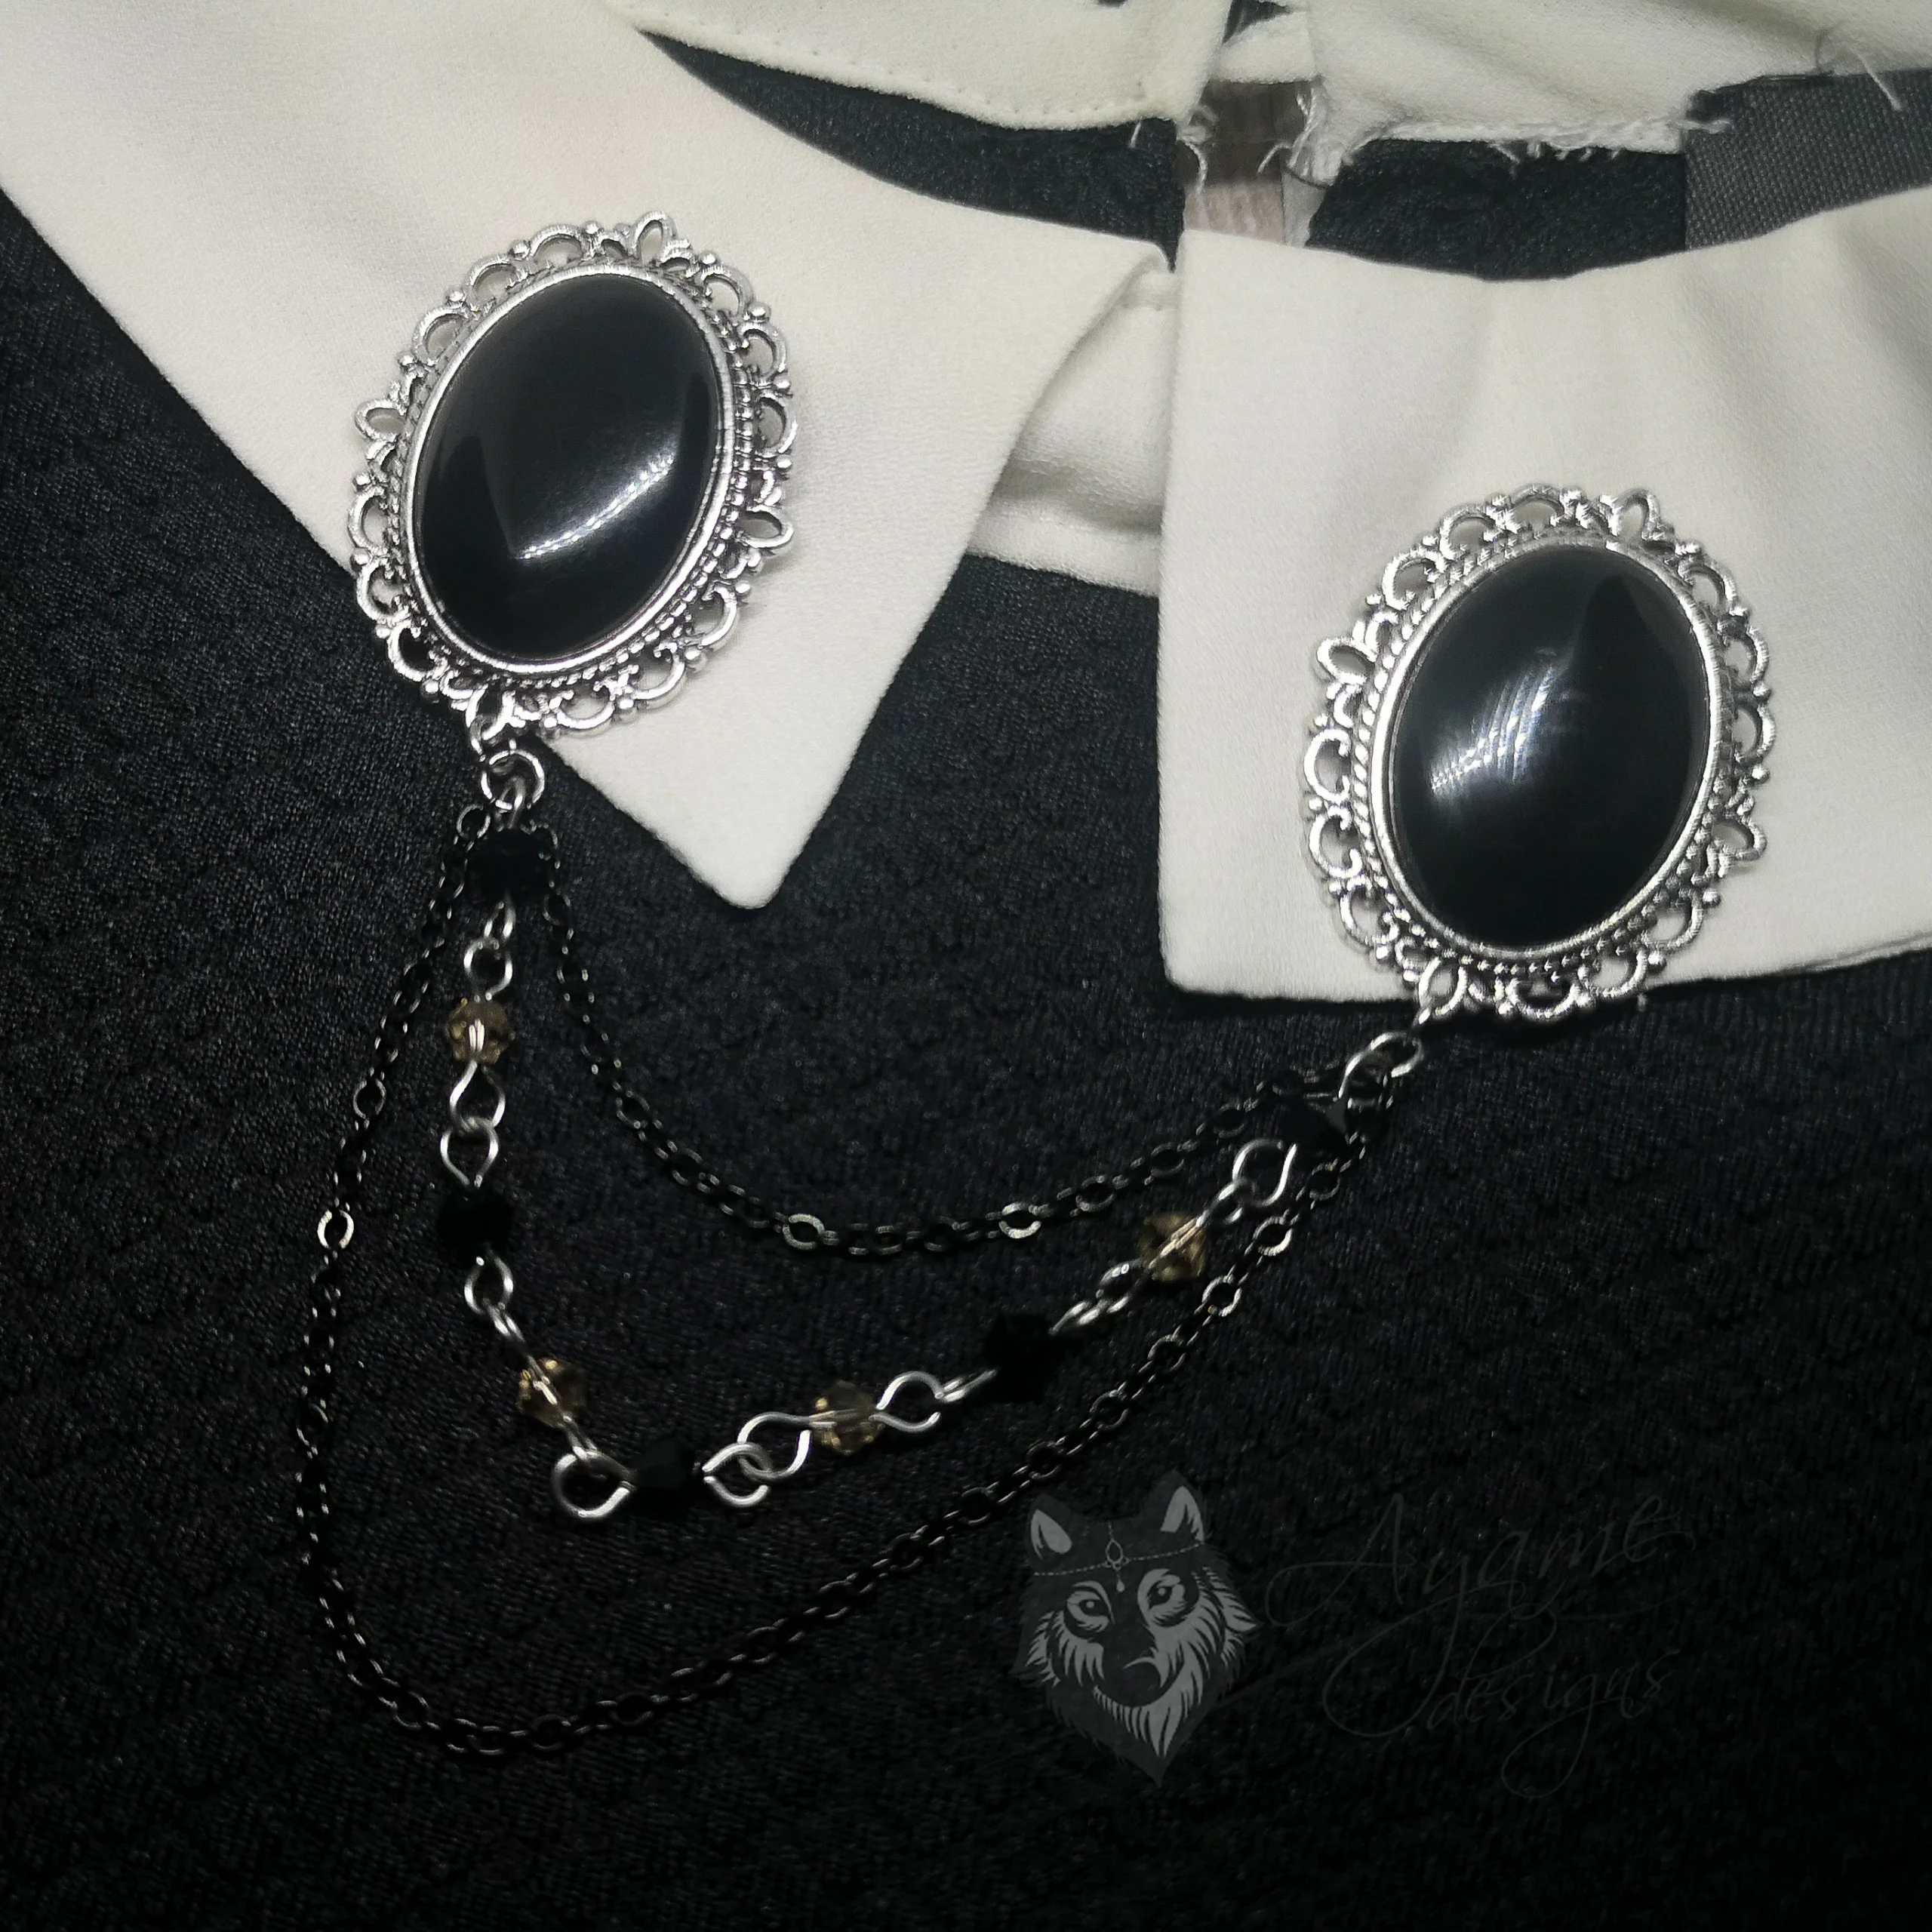 Collar pins with black resin cabochons in filigree frames, and 2 strands of chains and 1 strand of grey and black Austrian crystal beads